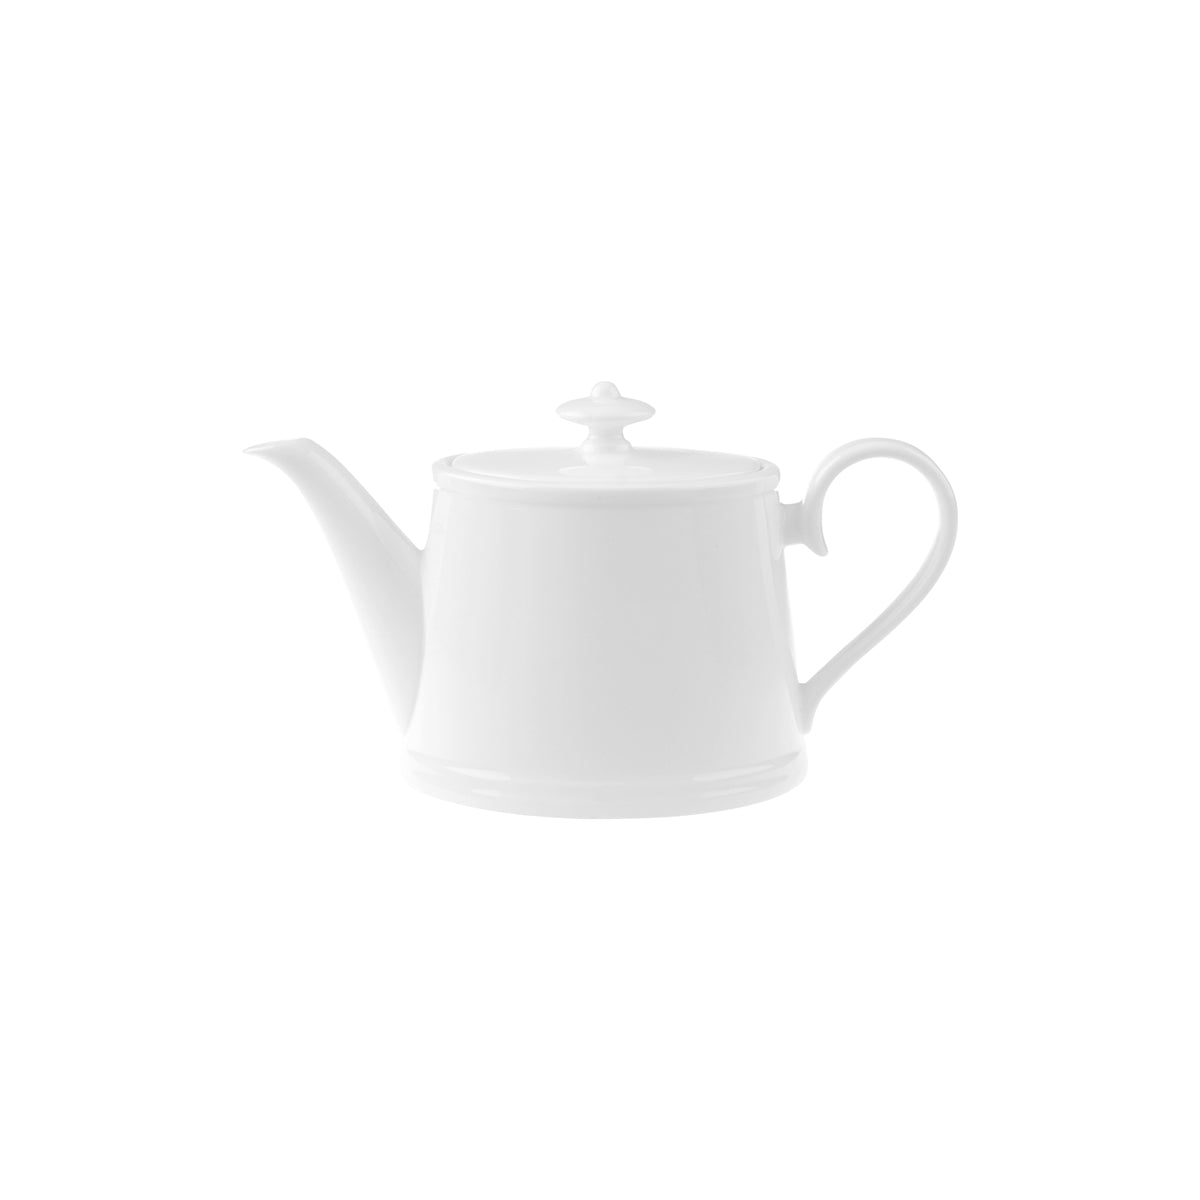 VB16-3272-0530 Villeroy And Boch Villeroy And Boch Stella Hotel White Teapot No. 5 with Lid 400ml Tomkin Australia Hospitality Supplies